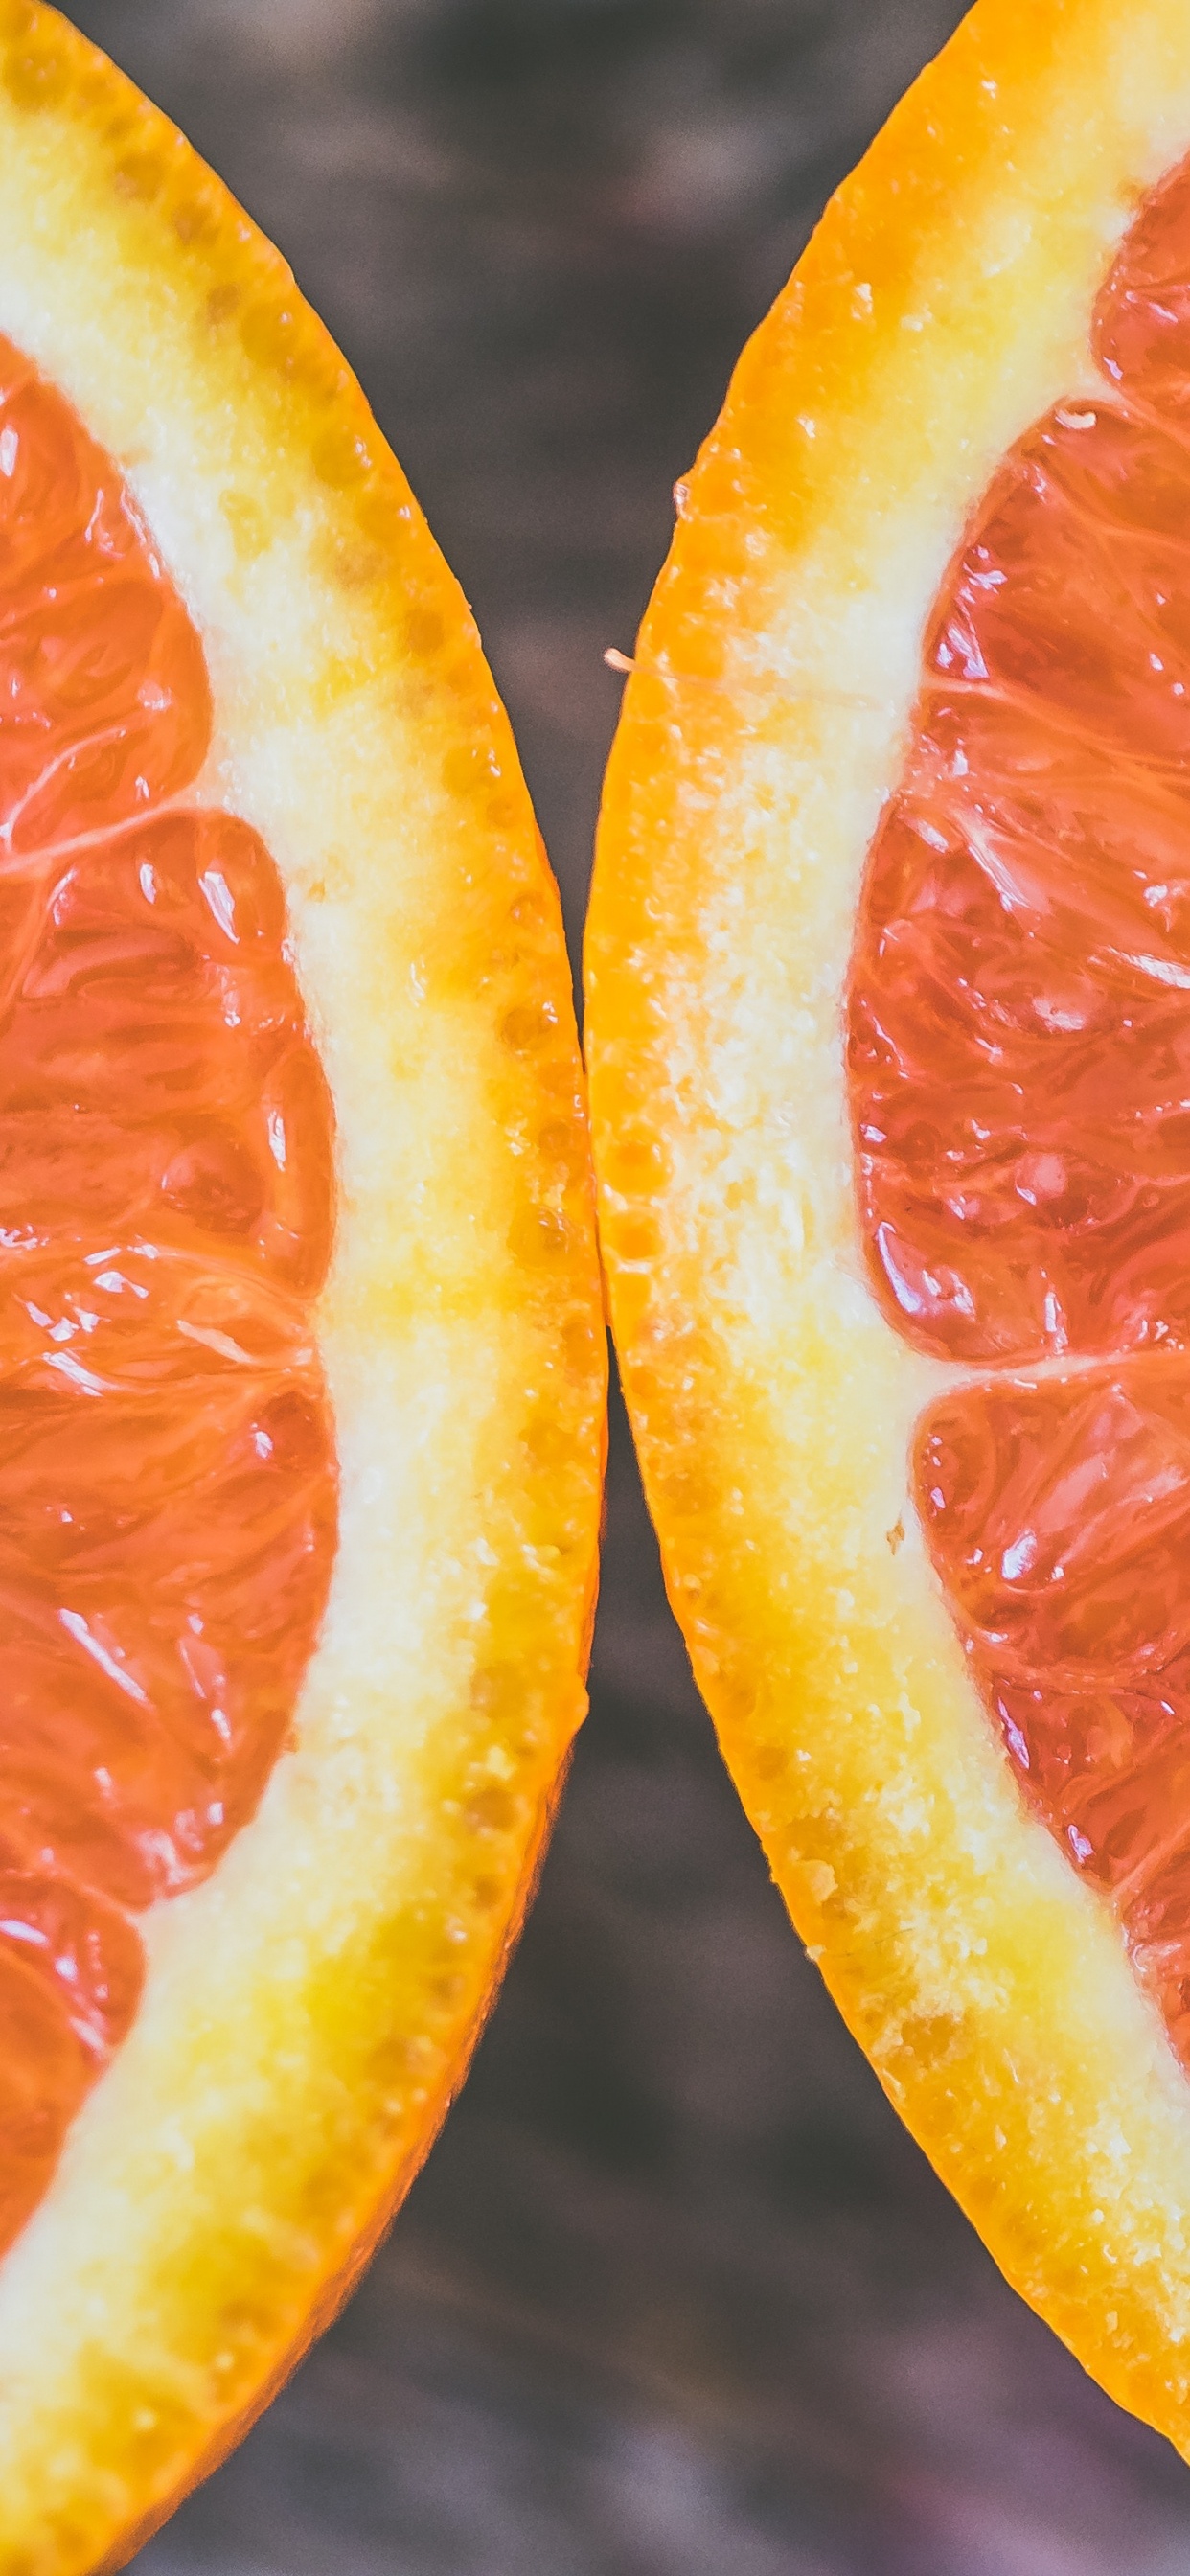 Sliced Orange Fruit in Close up Photography. Wallpaper in 1242x2688 Resolution